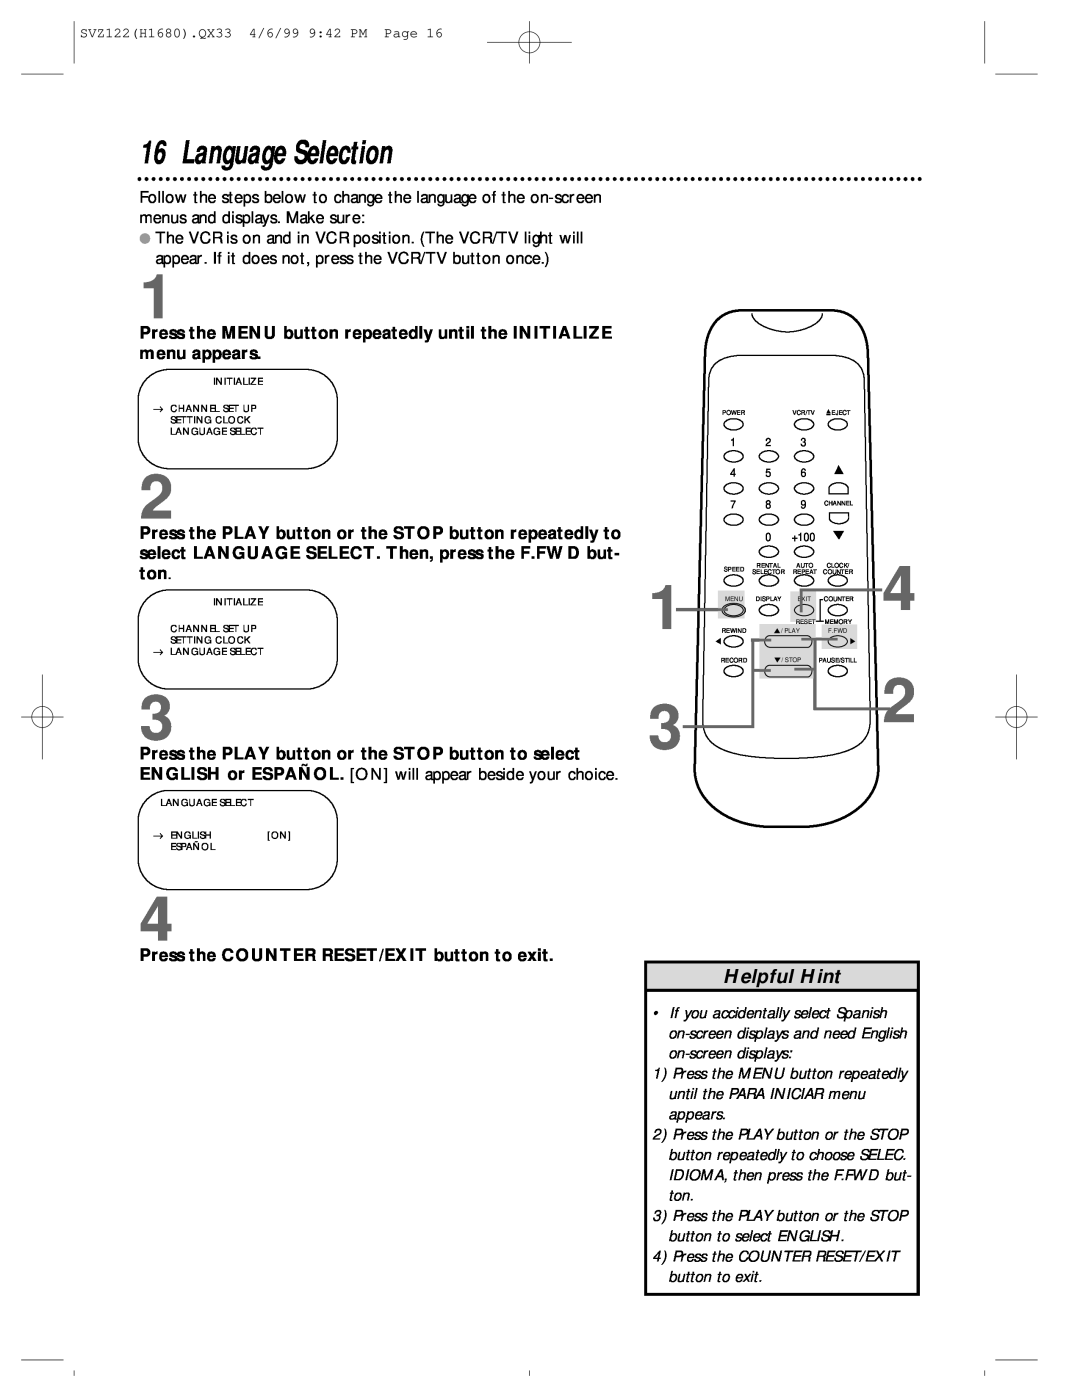 Philips SVZ122 owner manual Language Selection, Helpful Hint, Press the COUNTER RESET/EXIT button to exit, 1 2 4 5, 0 +100 